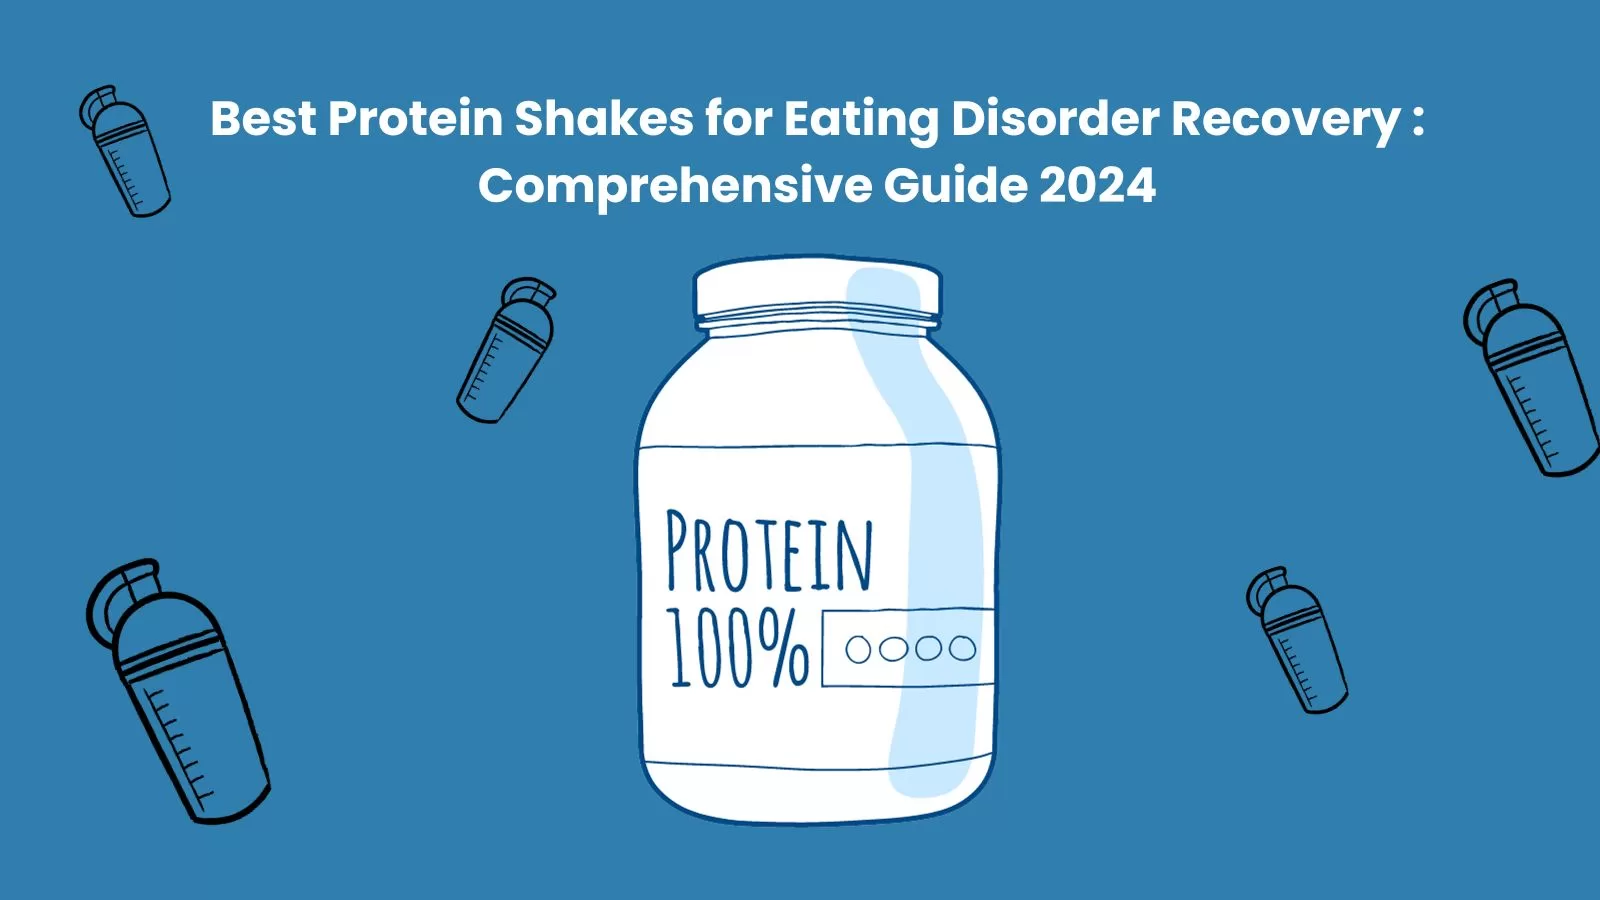 Best Protein Shakes for Eating Disorder Recovery